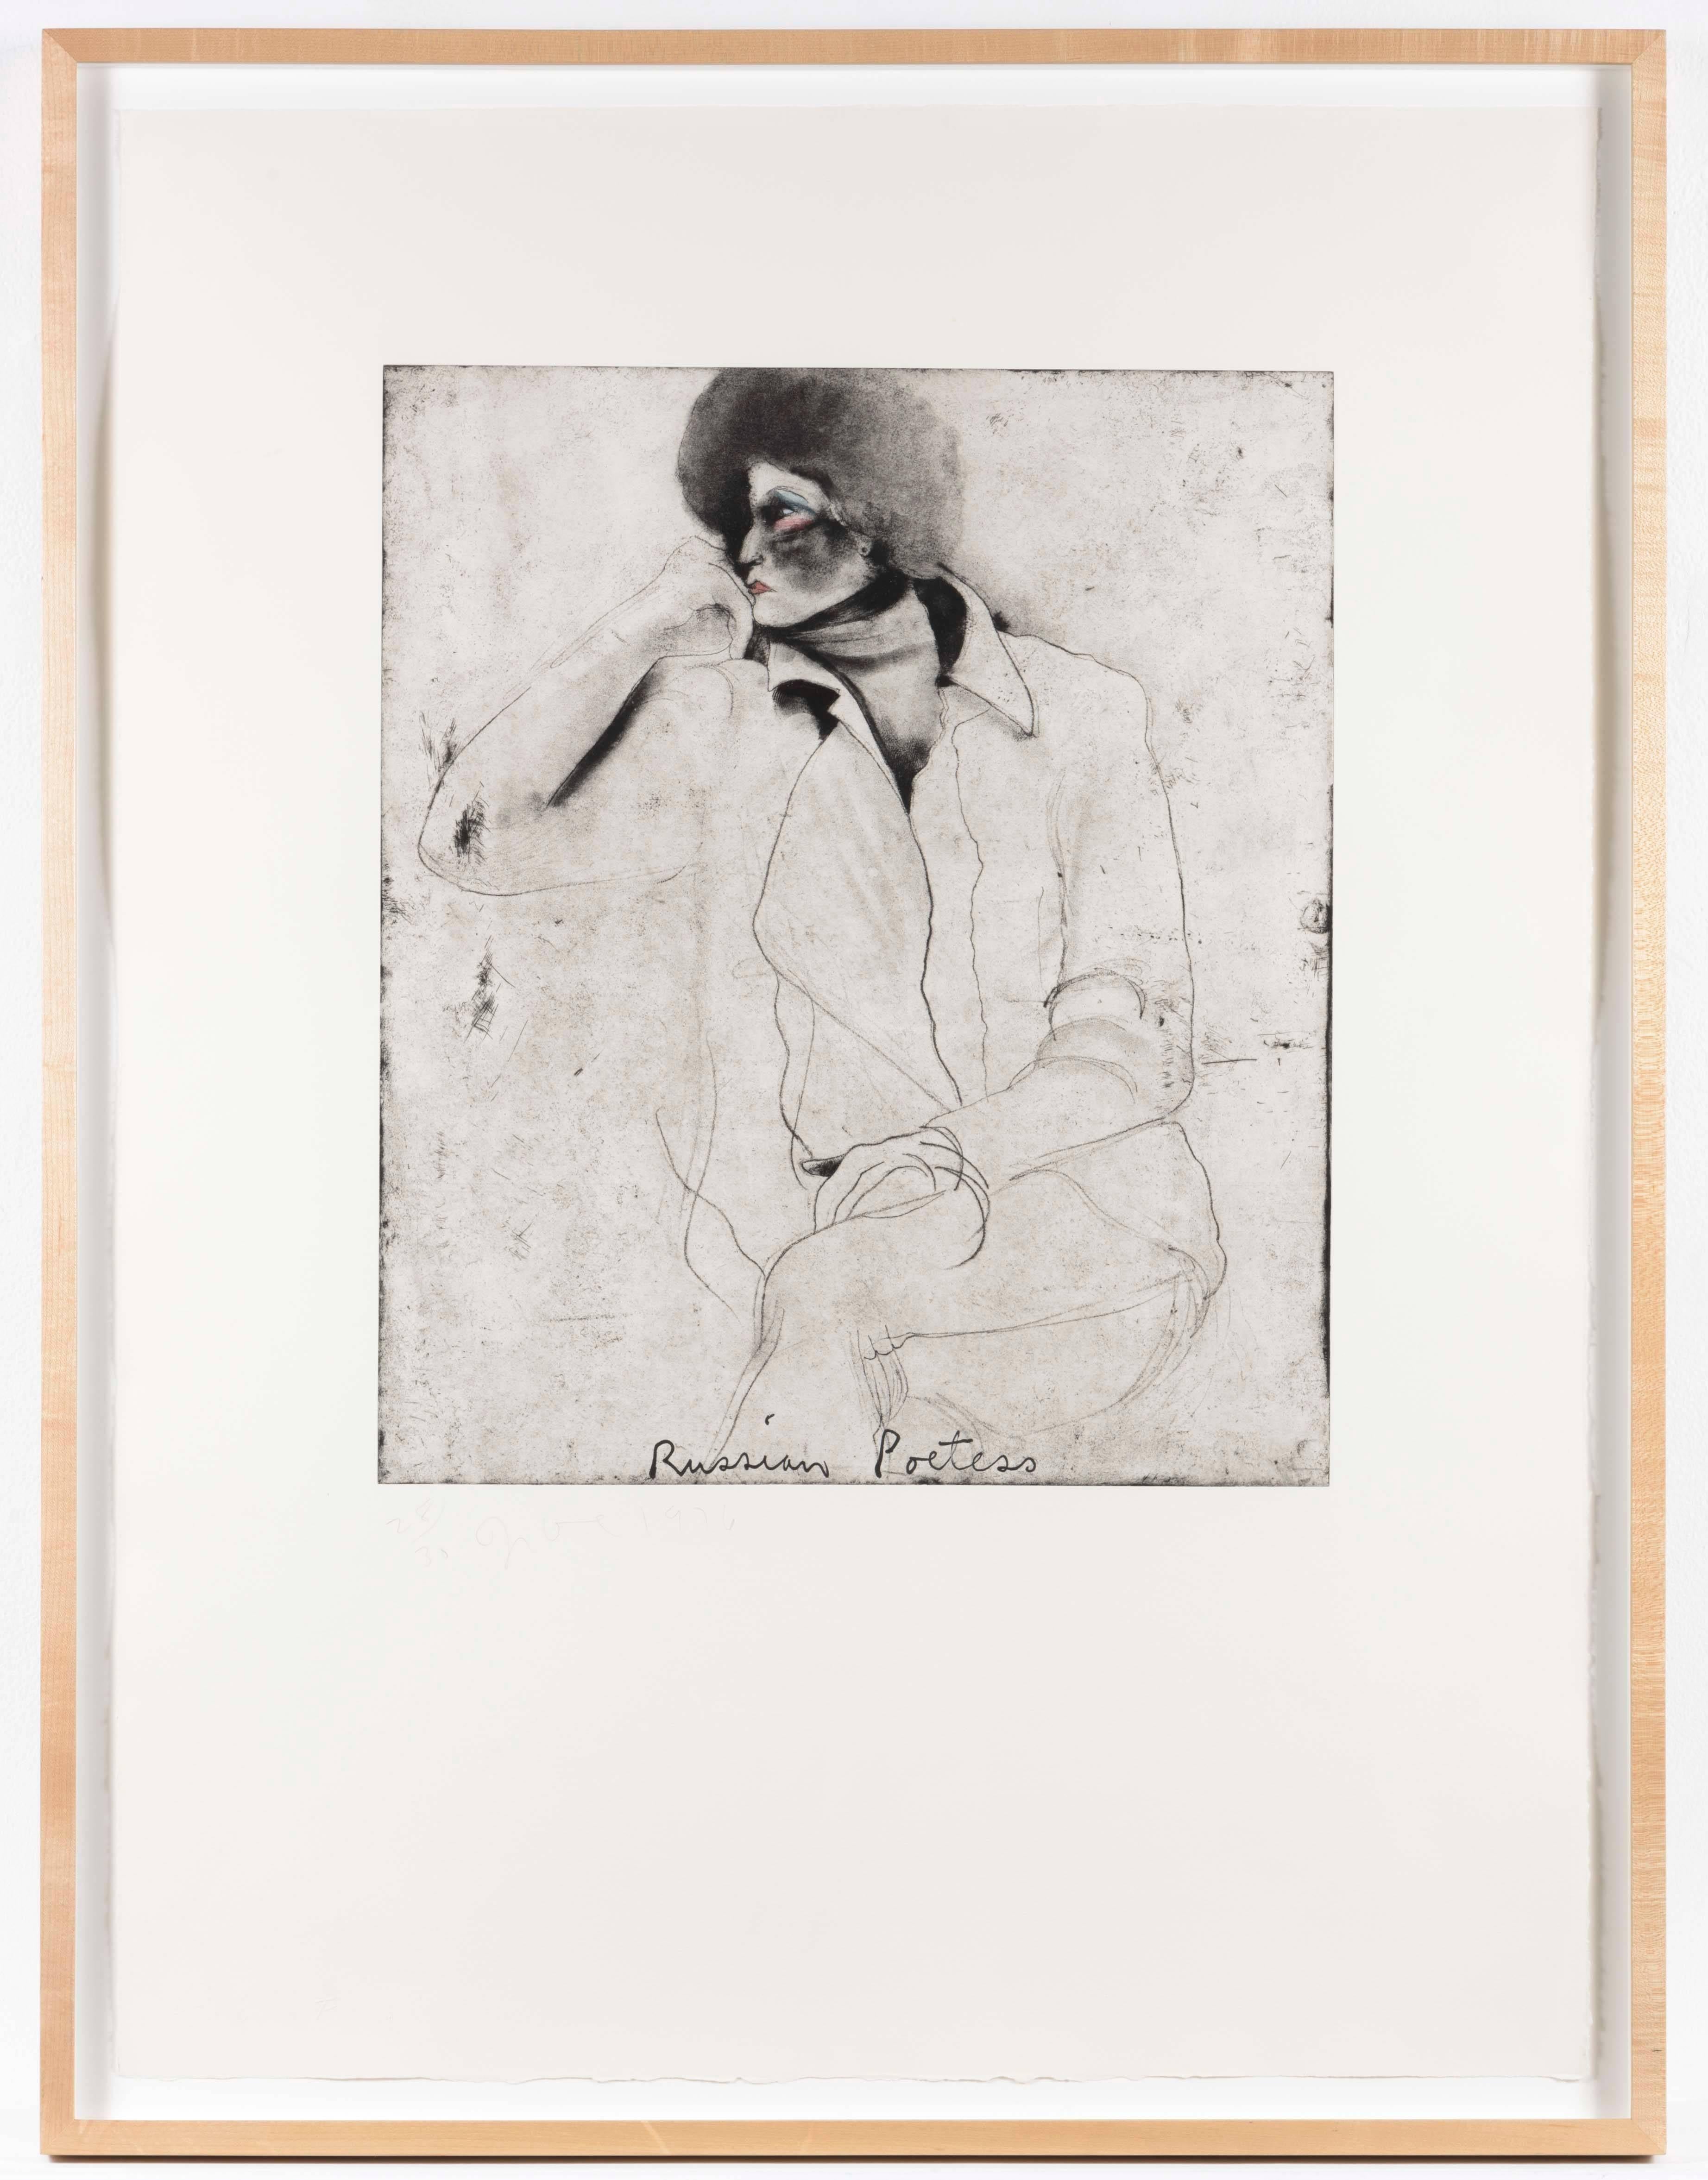 Russian Poetess, from Eight Sheets from an Undefined Novel - Contemporary Print by Jim Dine